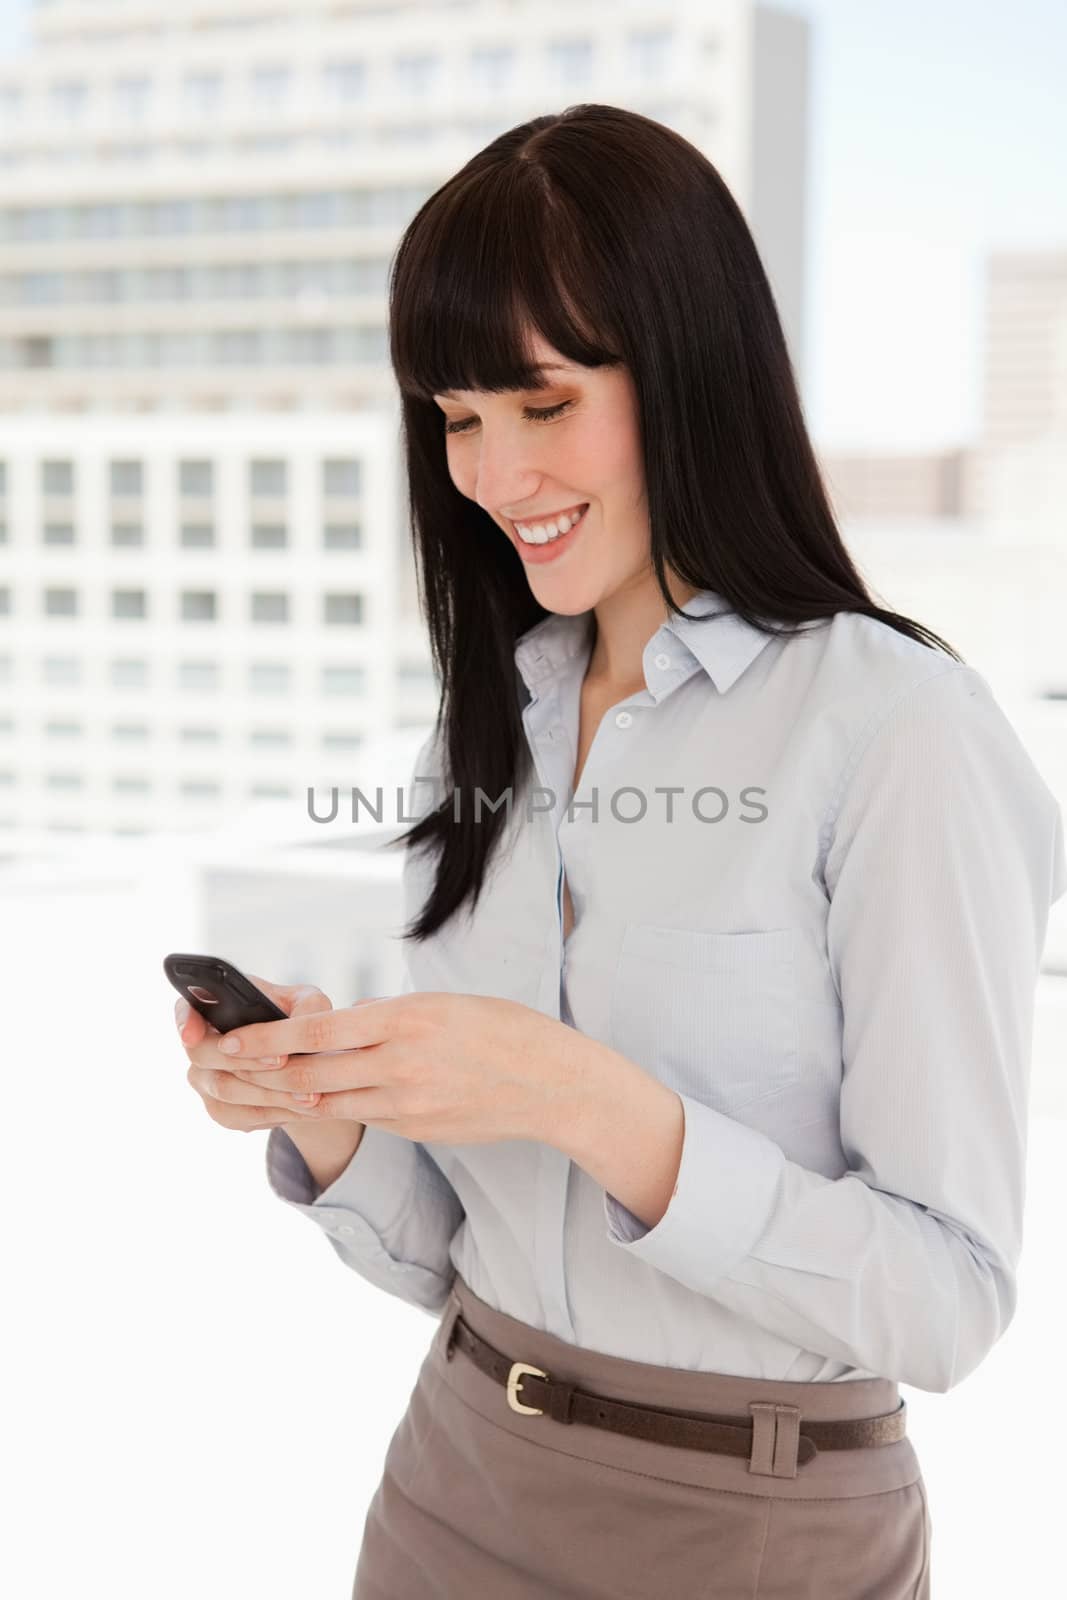 Smiling woman at work sending a text message by Wavebreakmedia